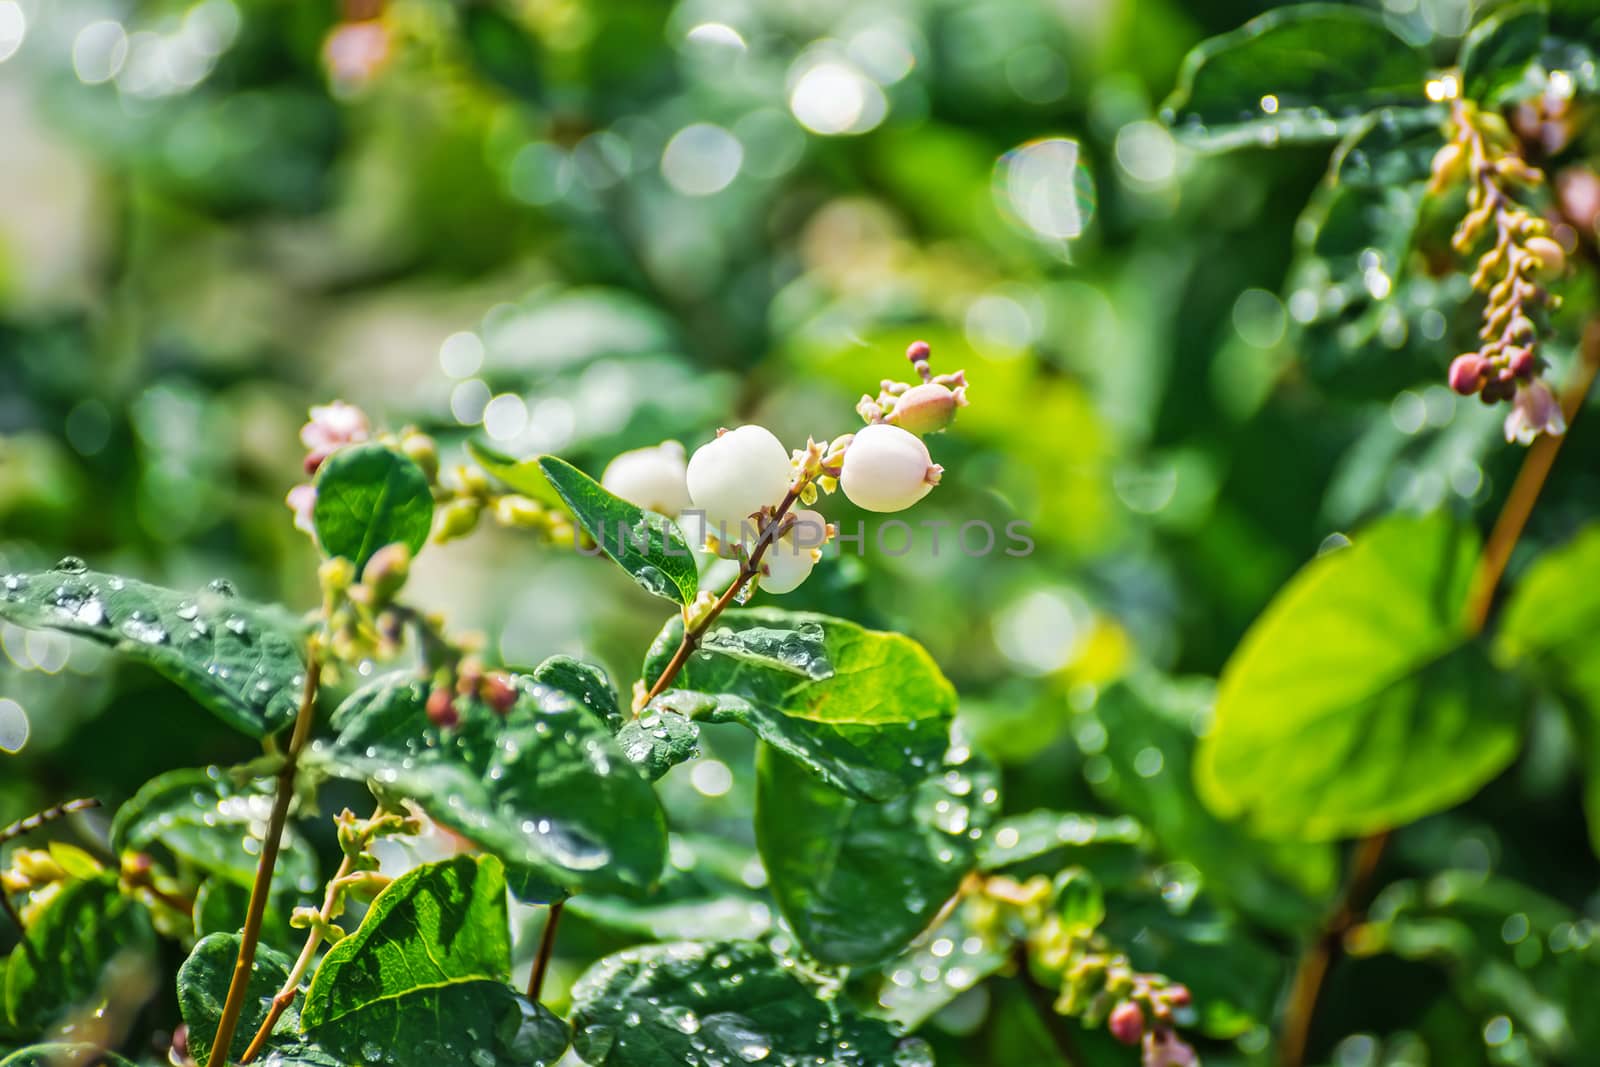 Snowberry in drops of water after a rain in a sunny day close up on a blurred background.